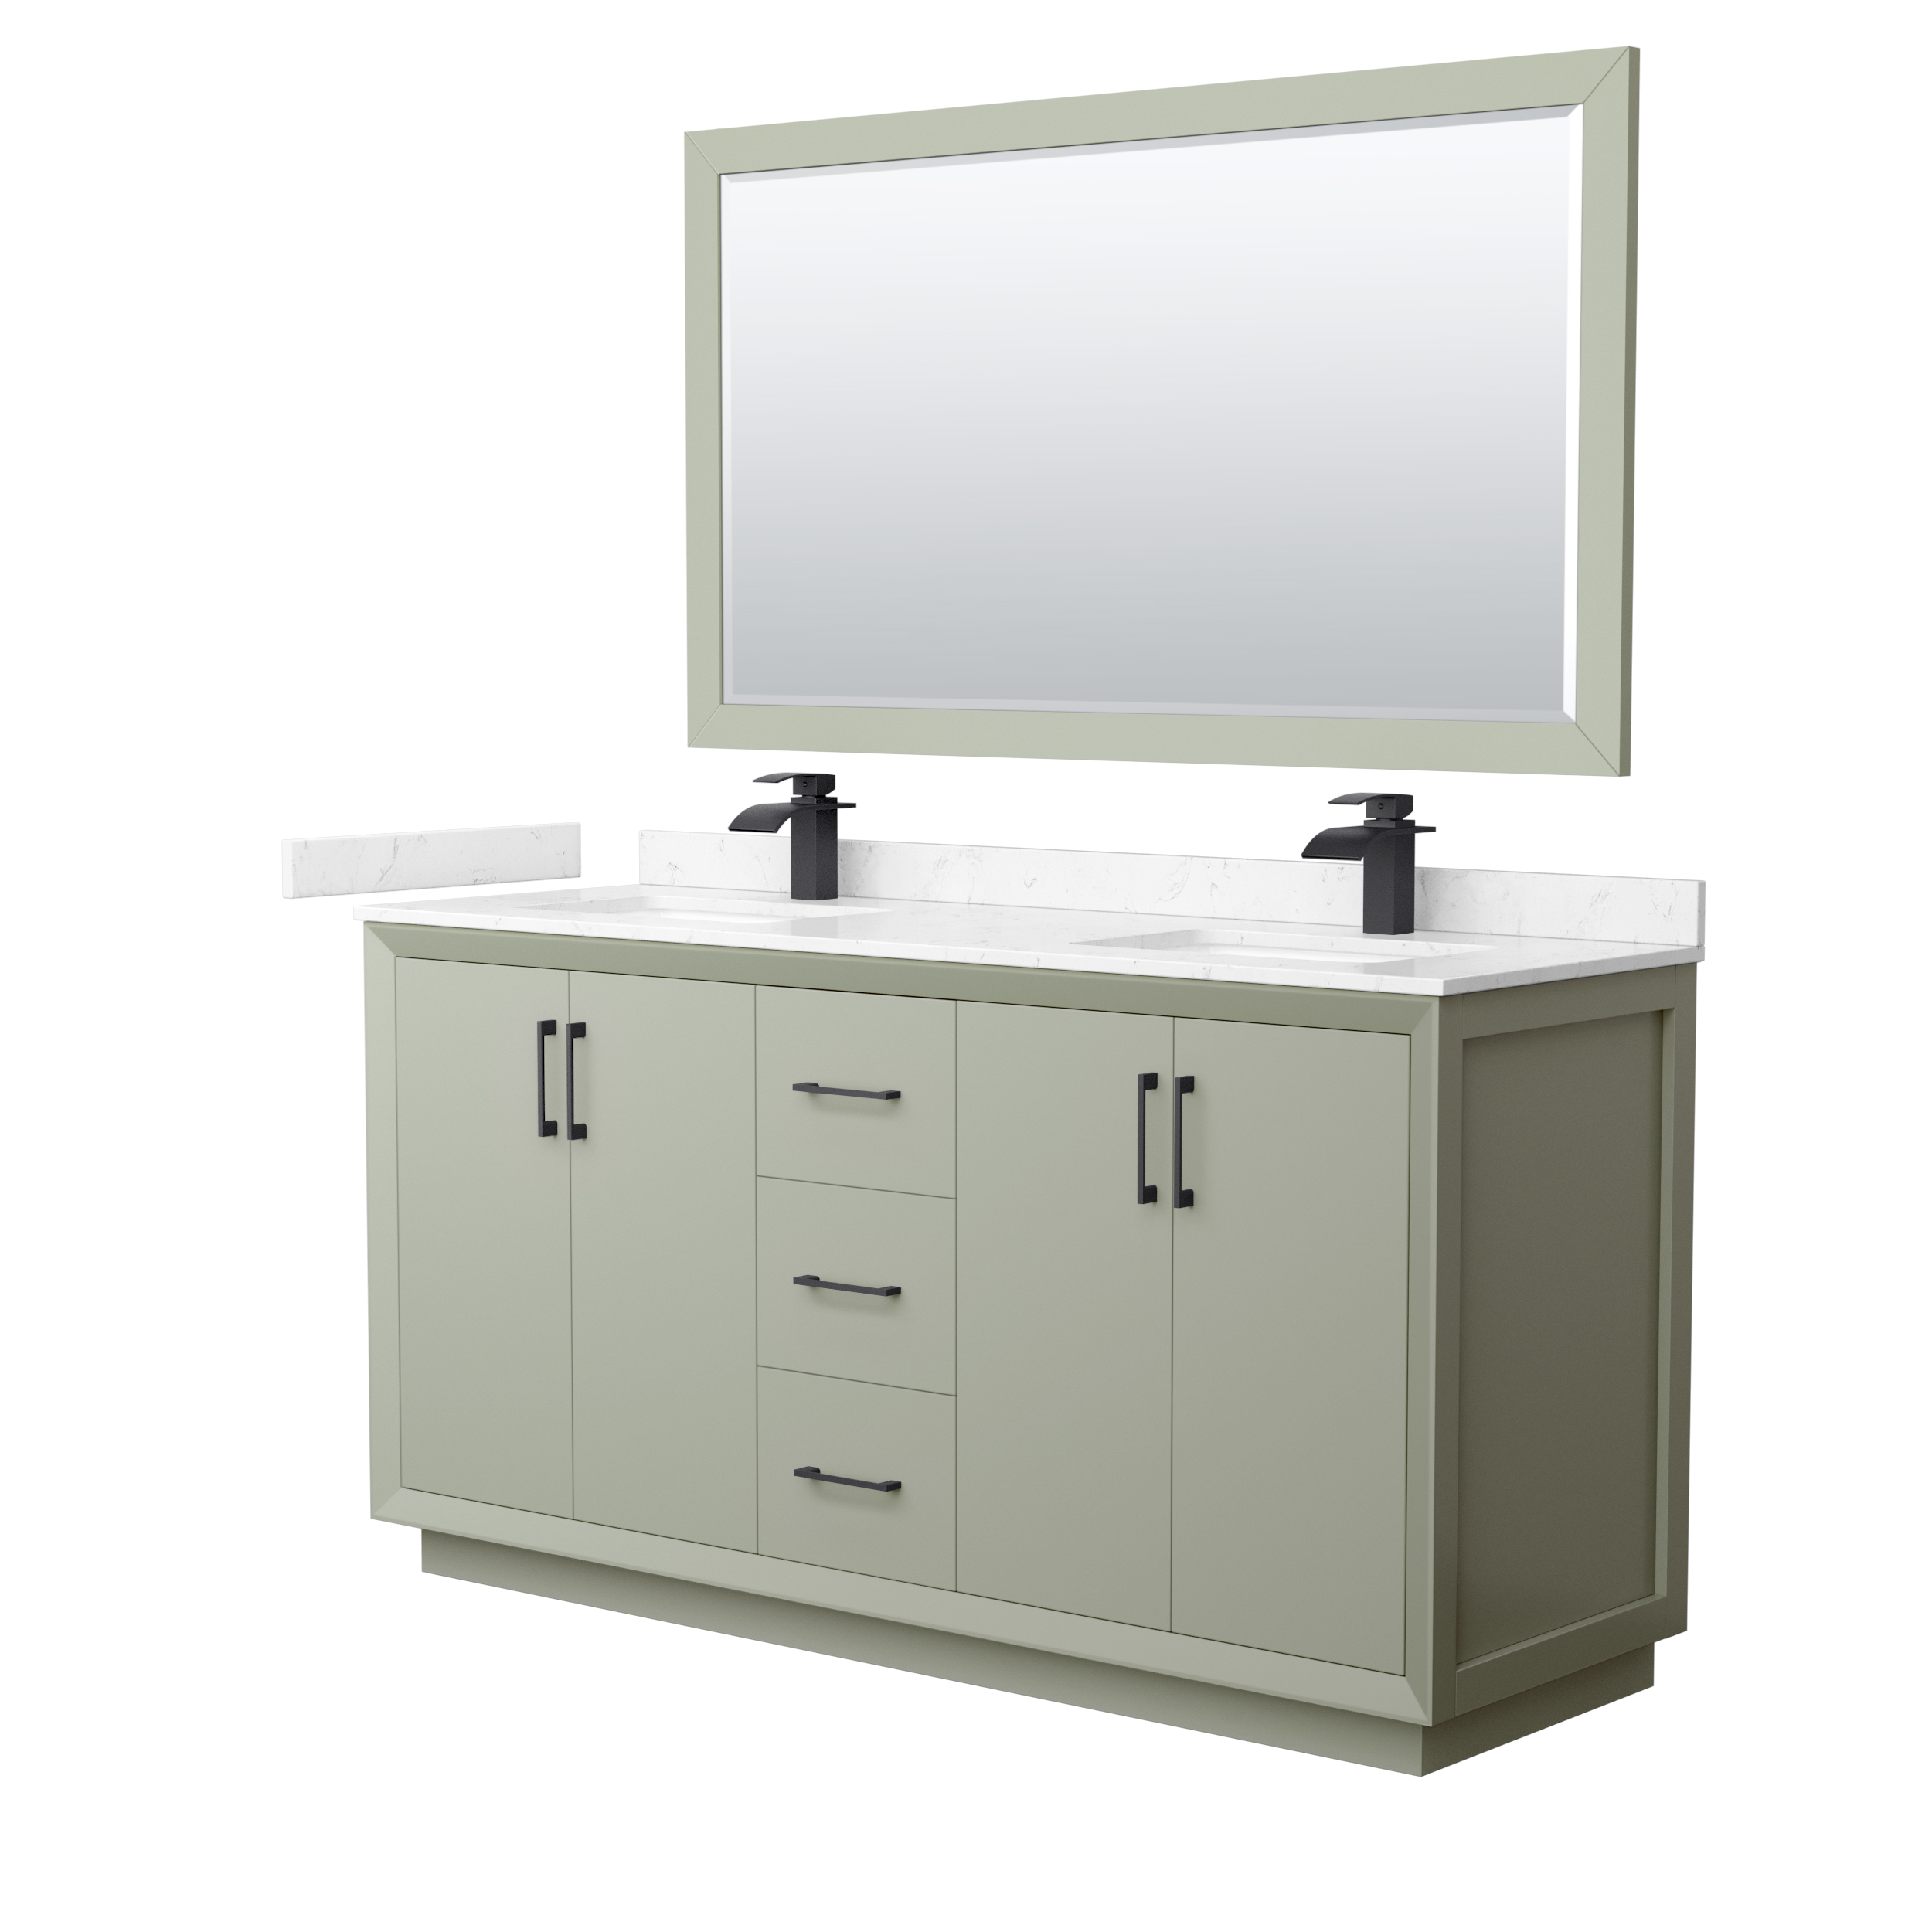 66" Transitional Double Vanity Base in Light Green, 3 Top Option, with 3 Hardware Options and Mirror Option